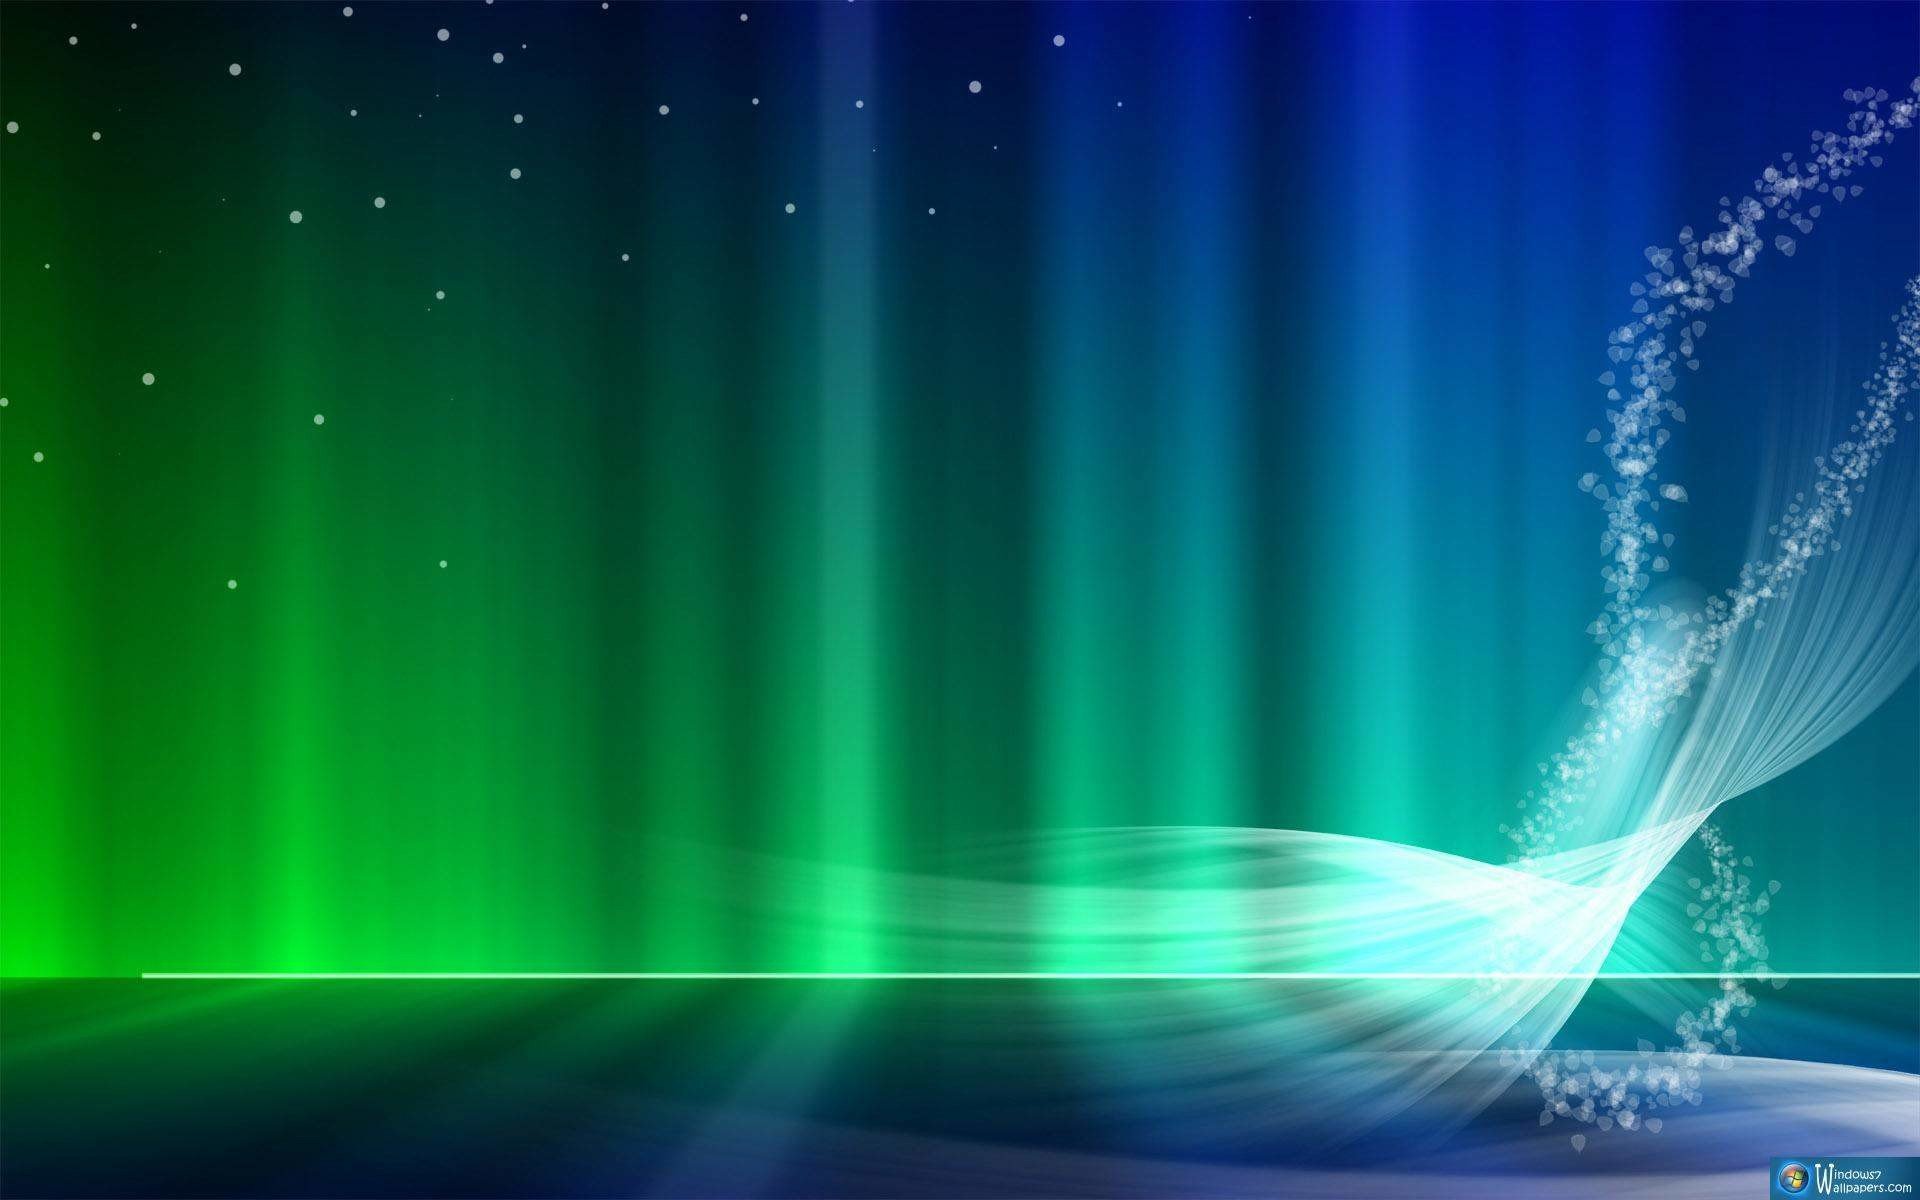 Live Wallpapers PC Windows 52 images